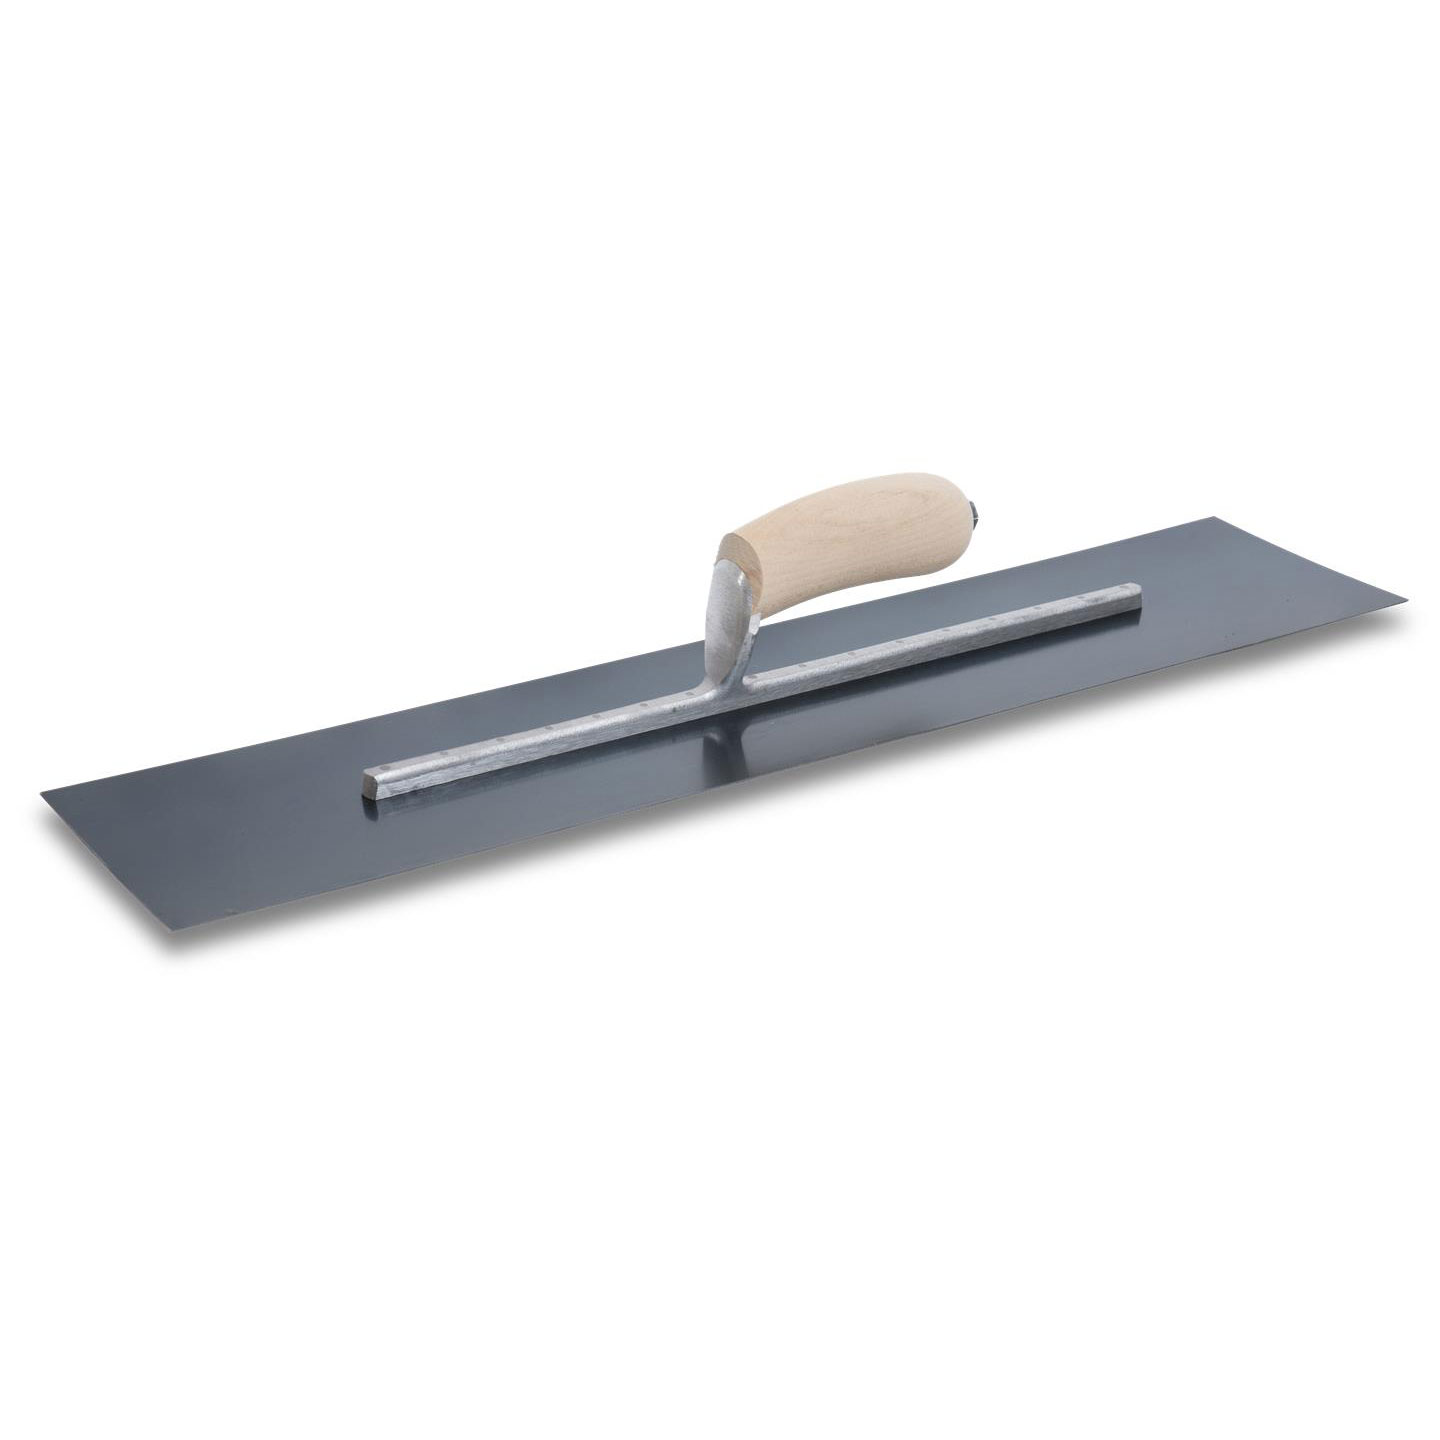 Marshalltown MXS20B 20in x 4in Blue Steel Finishing Trowel with Curved Wood Handle MXS20B